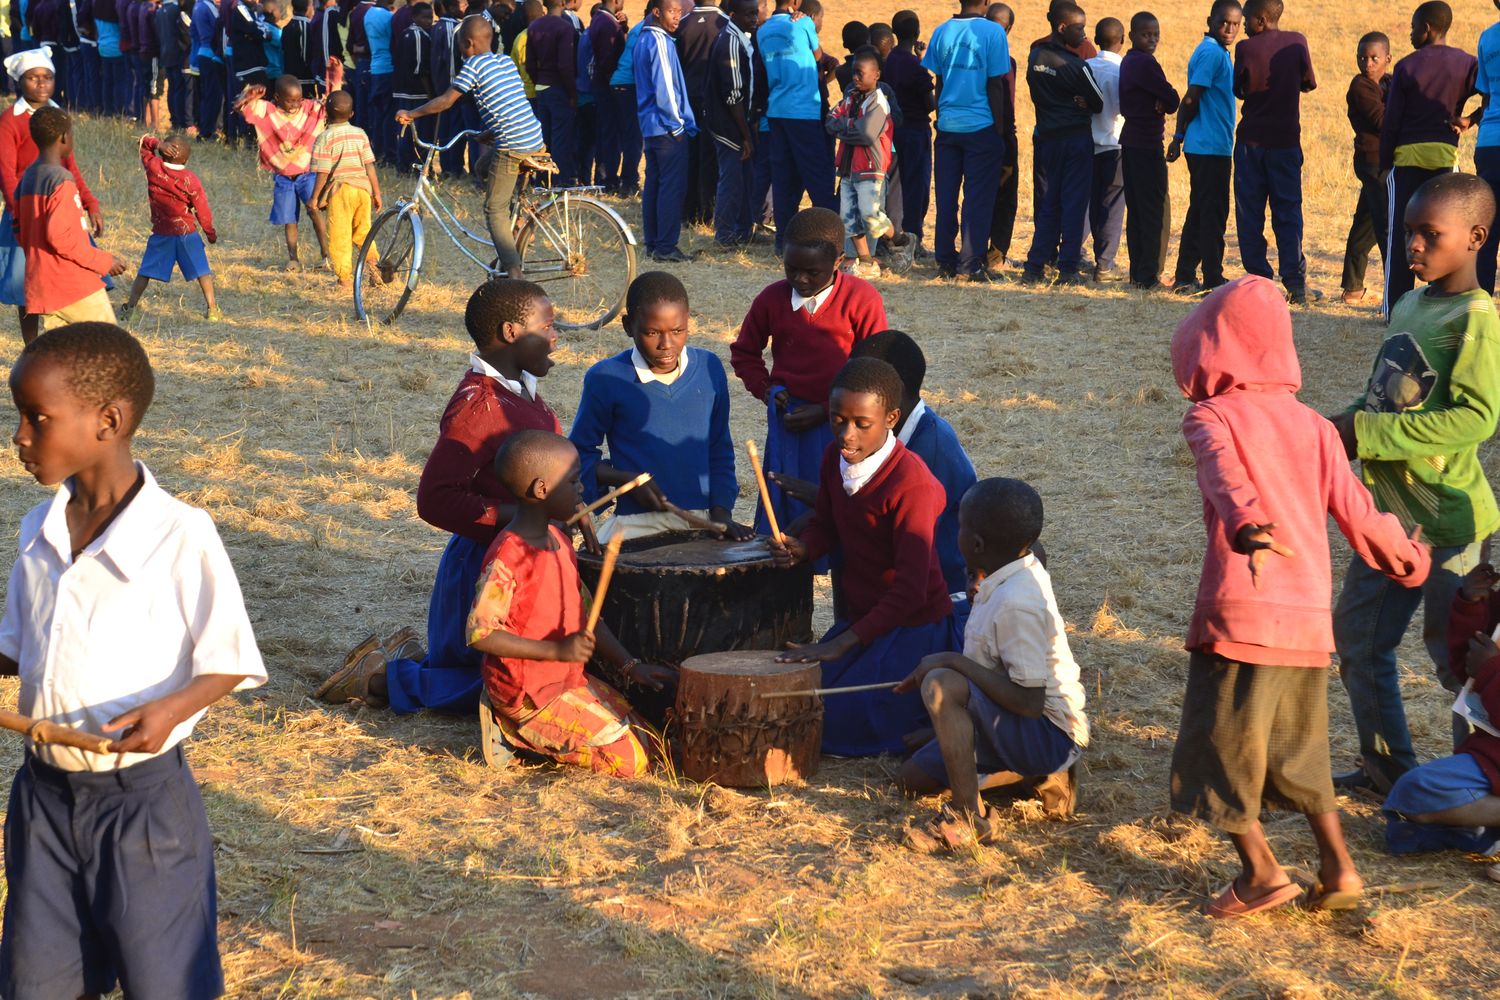 Kids playing with drums at the end of the festival